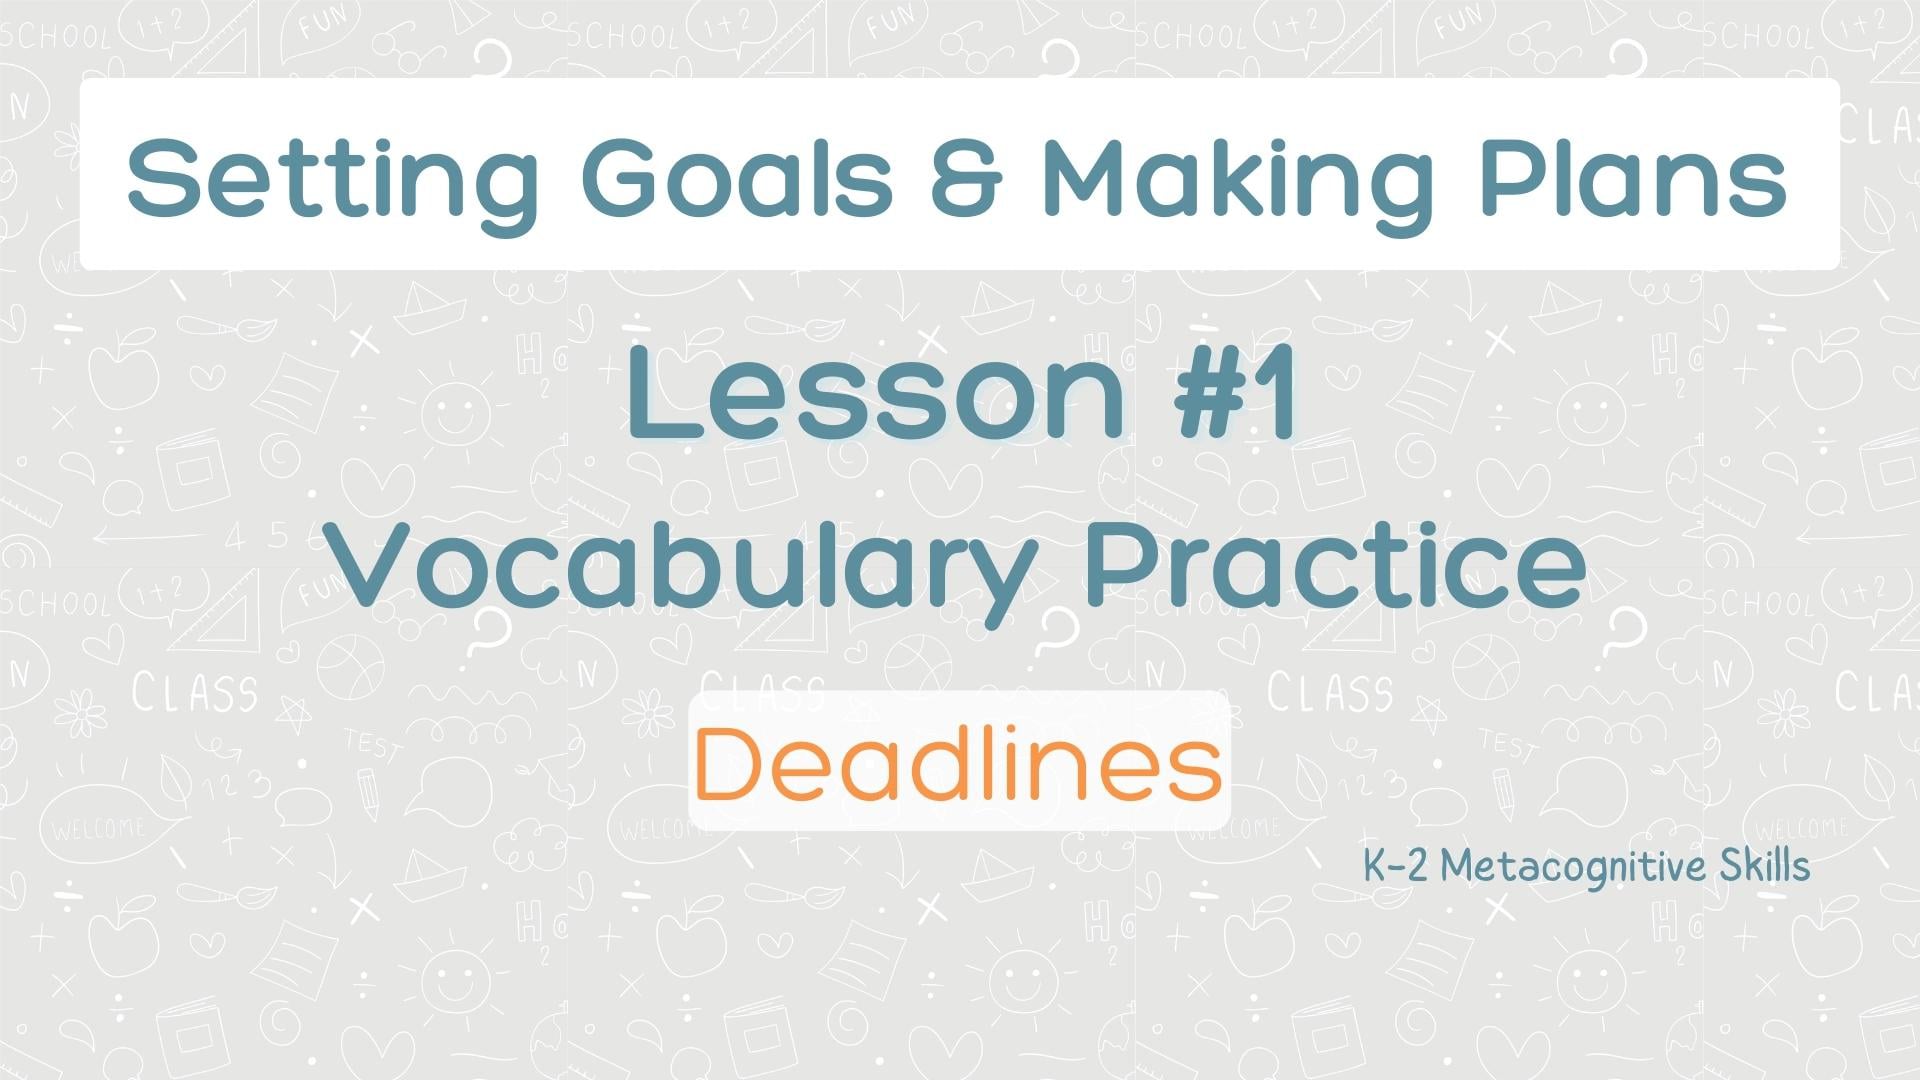 Lesson #1 Vocabulary Practice: Goals video thumbnail